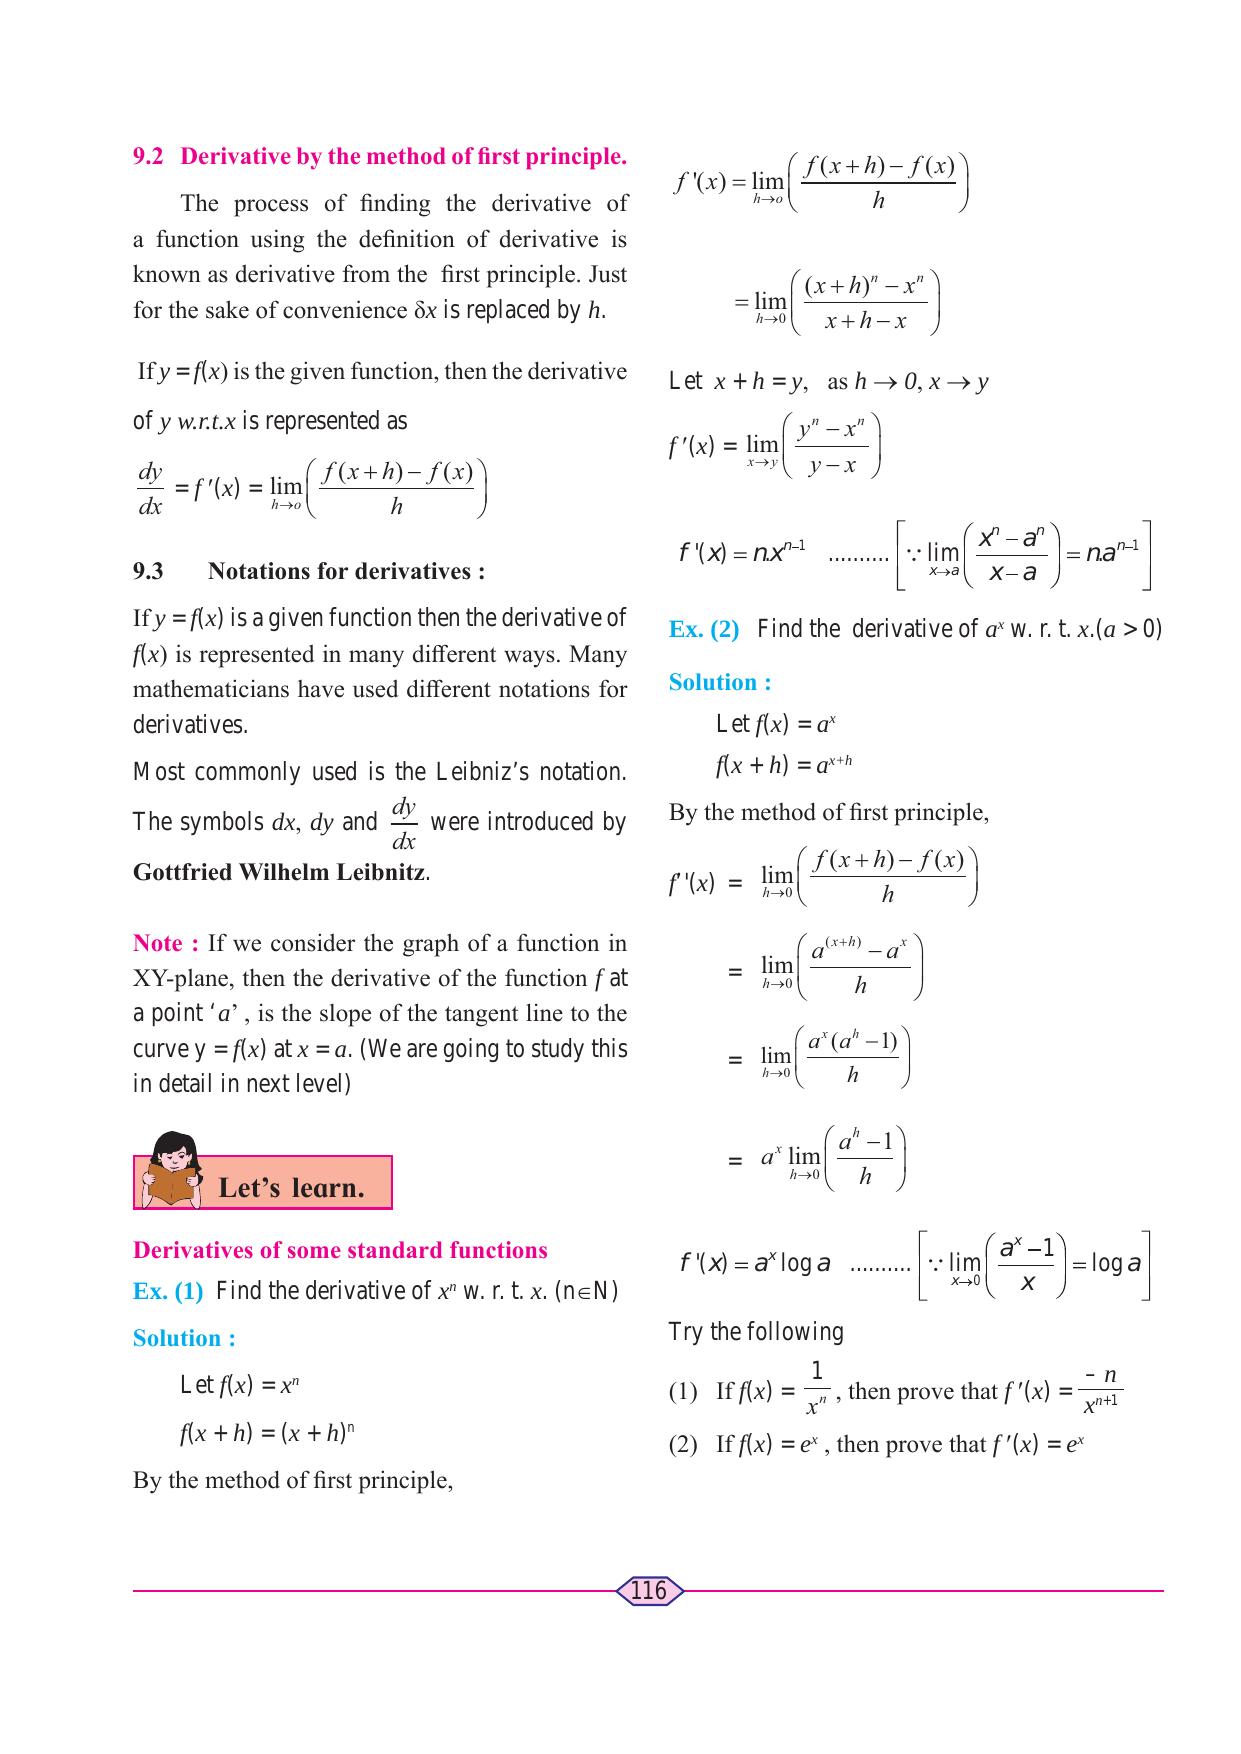 Maharashtra Board Class 11 Maths (Commerce) (Part 1) Textbook - Page 126